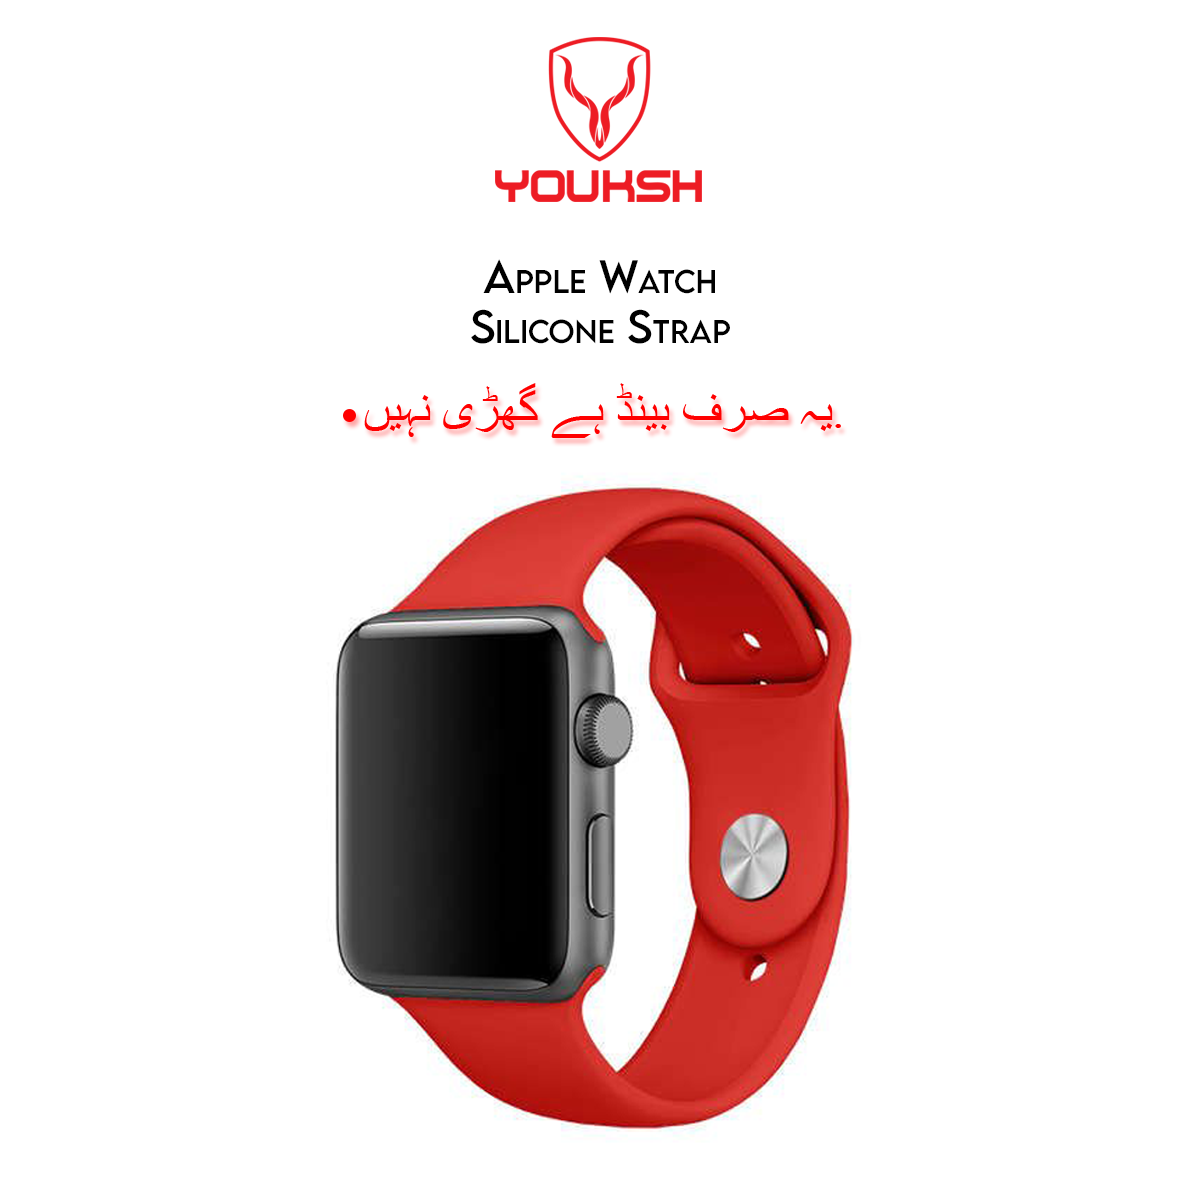 YOUKSH - Apple Watch 42mm/44mm Silicone Strap - 42mm/44mm Silicone Strap - 42mm/44mm Silicone Band Strap - For Apple Series - 1/2/3/4/5/6.